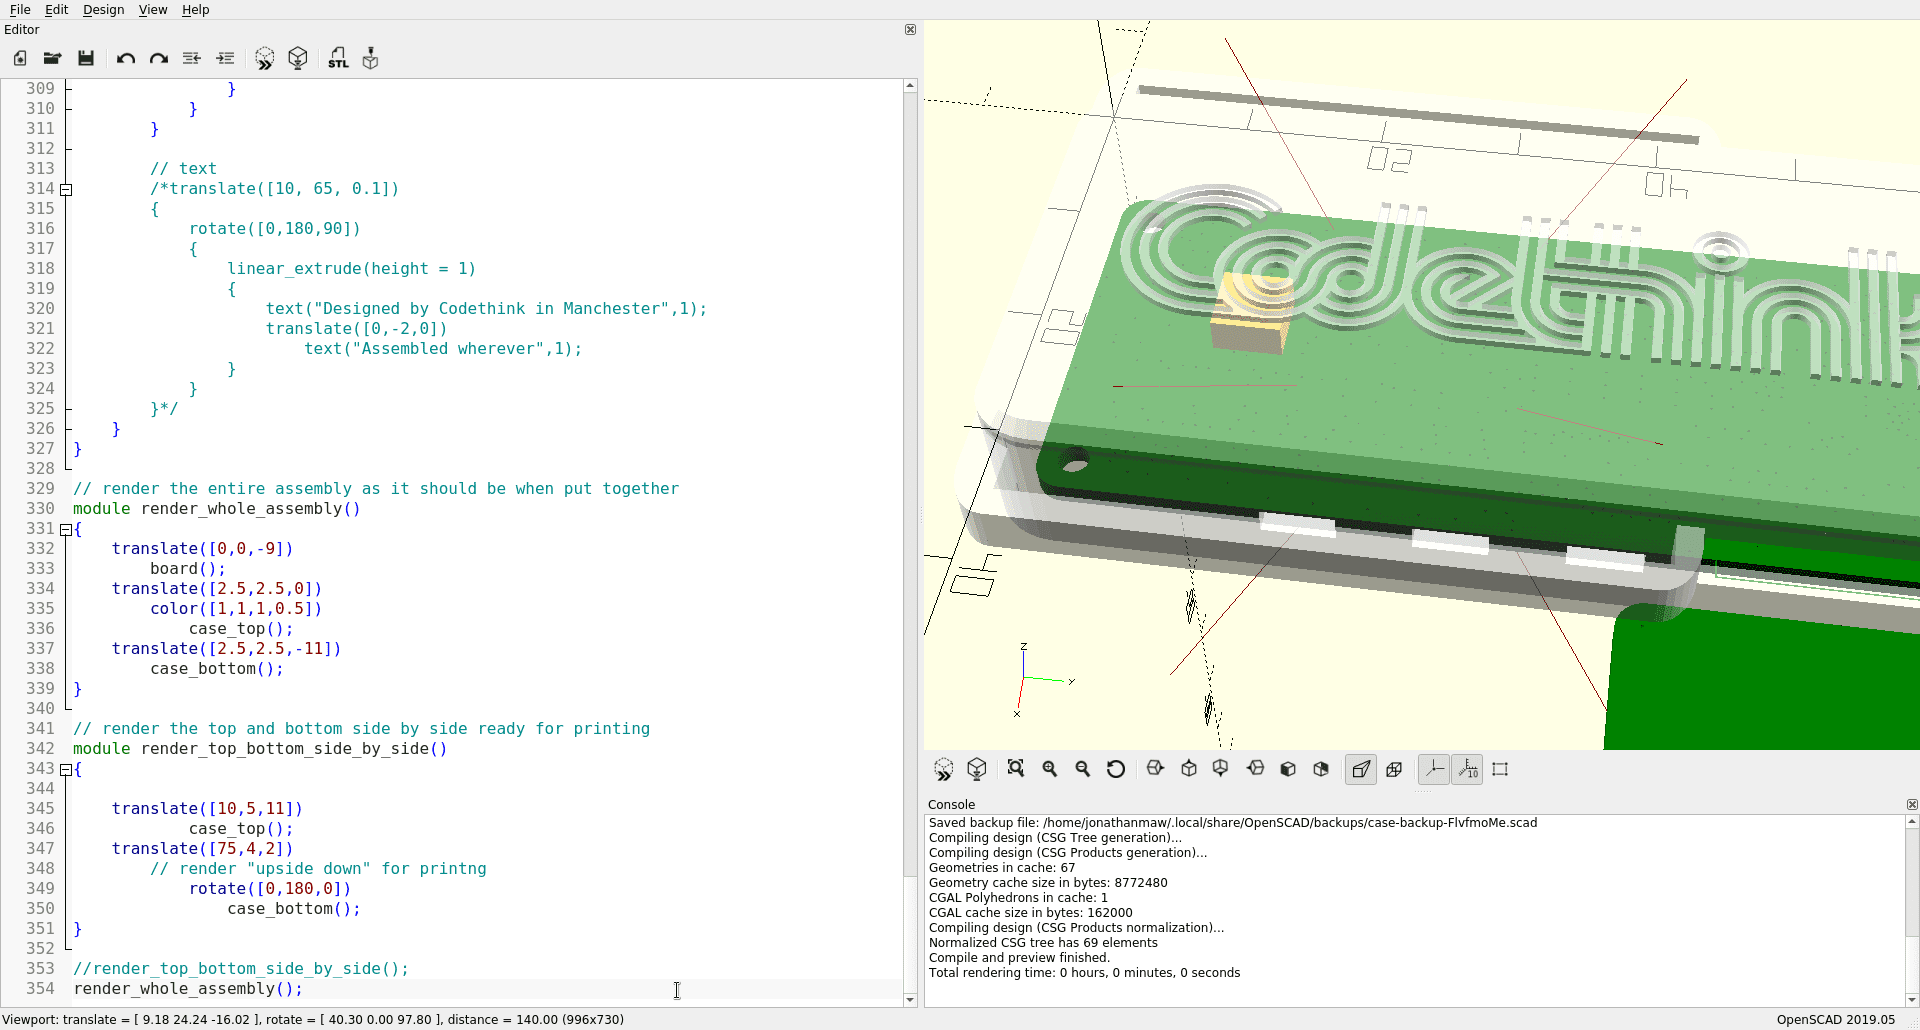 render_whole_assembly